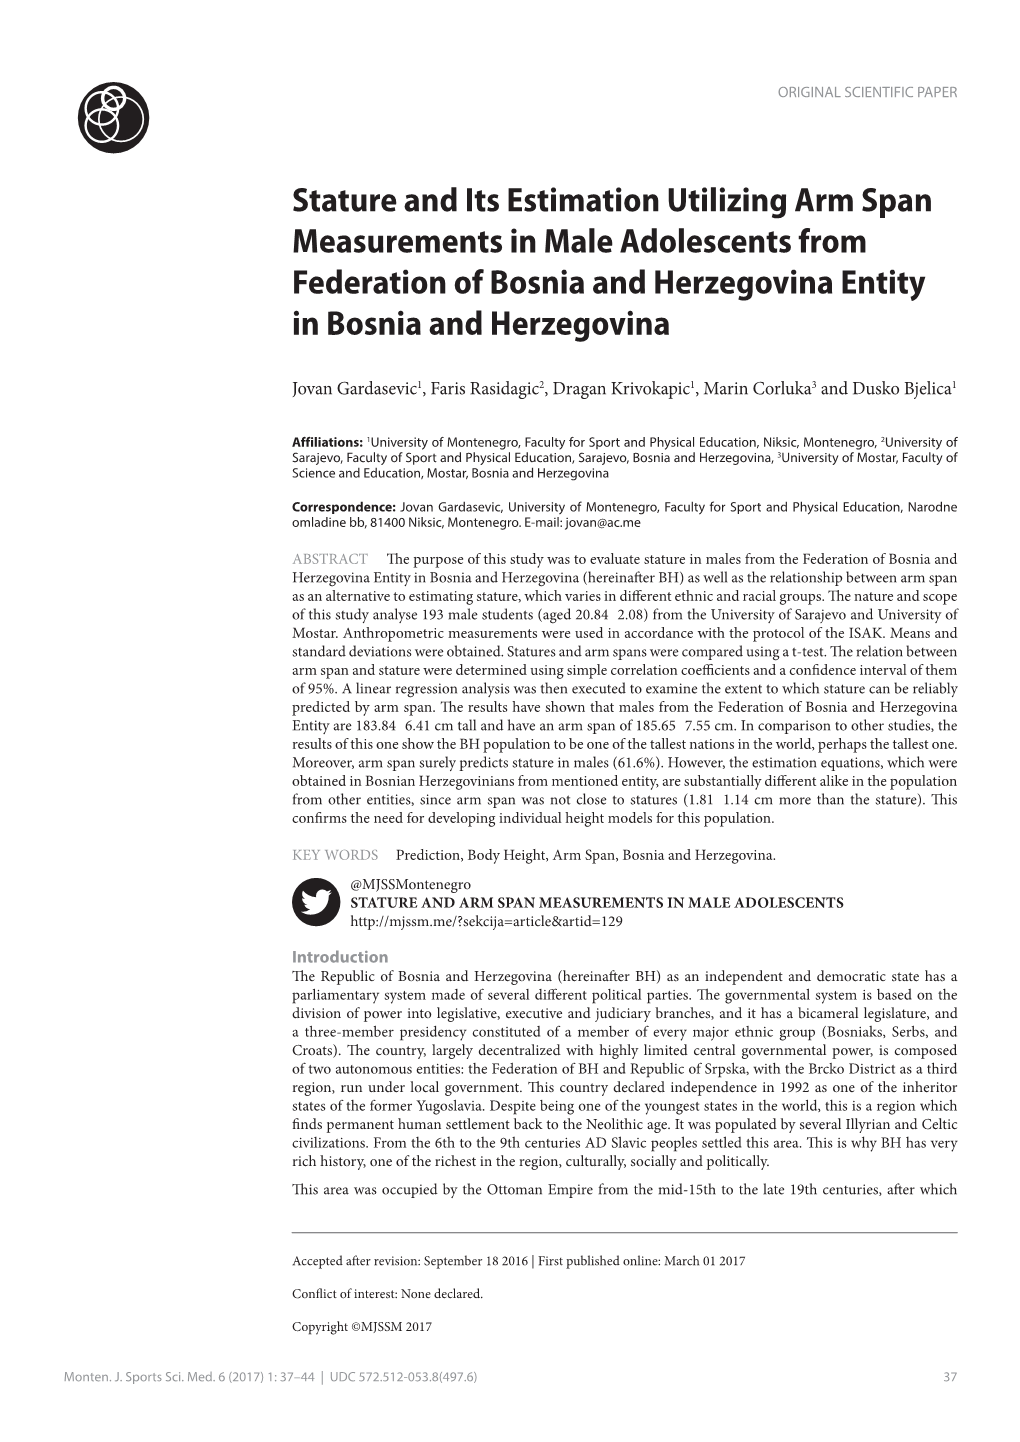 Stature and Its Estimation Utilizing Arm Span Measurements in Male Adolescents from Federation of Bosnia and Herzegovina Entity in Bosnia and Herzegovina